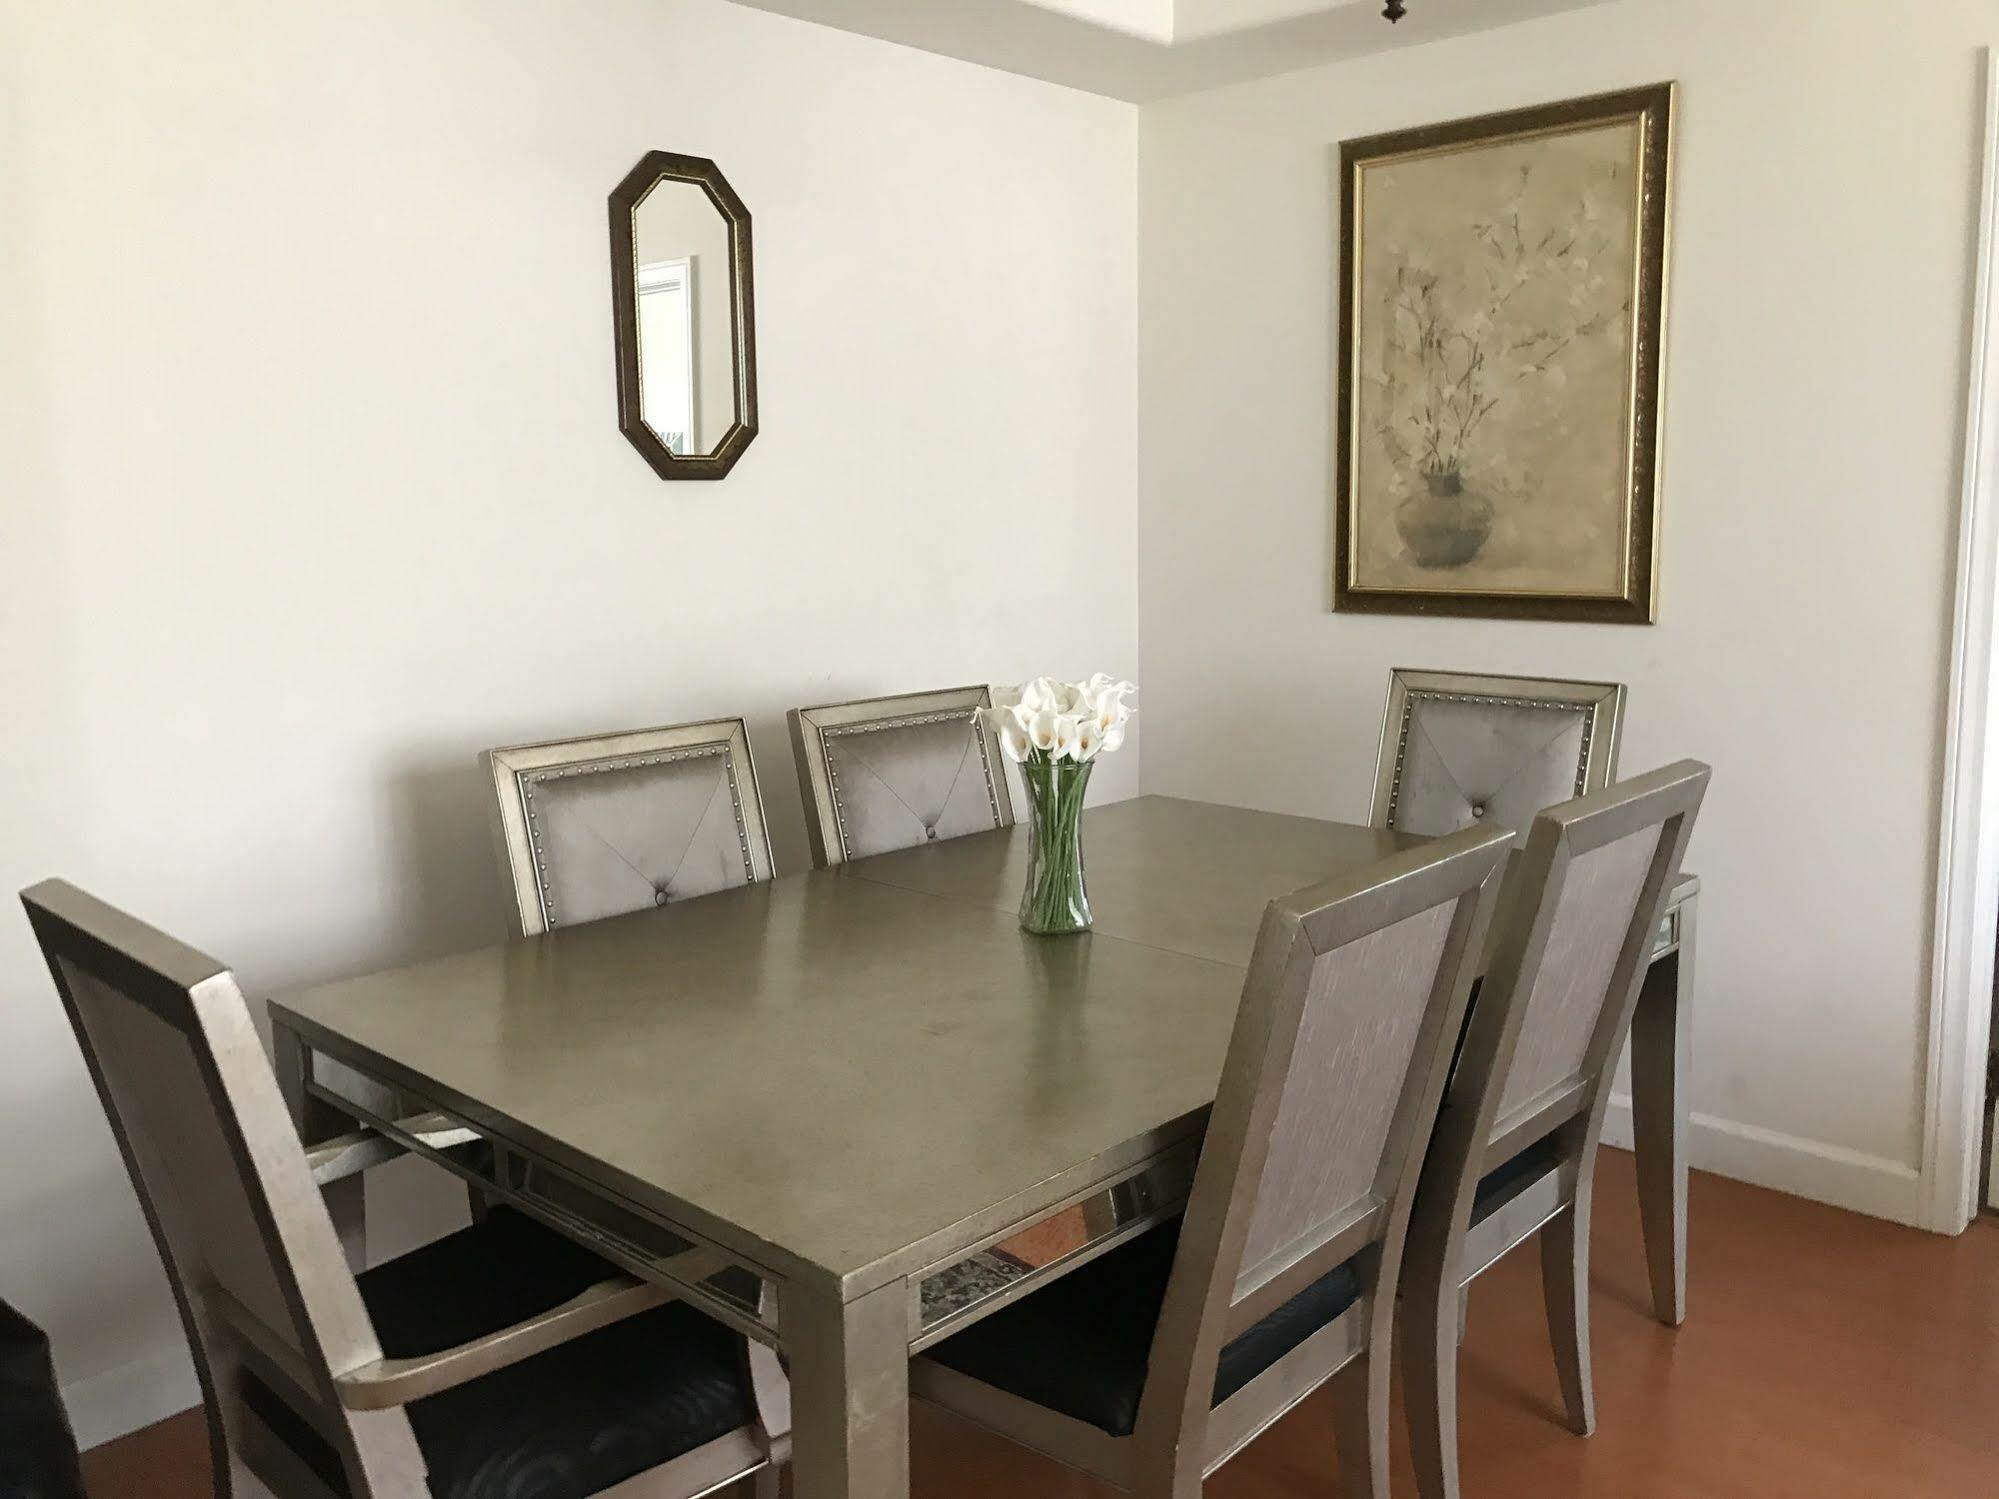 Fully Furnished Apartment In La Close To Beverly Hills Μπέβερλι Χιλς Εξωτερικό φωτογραφία